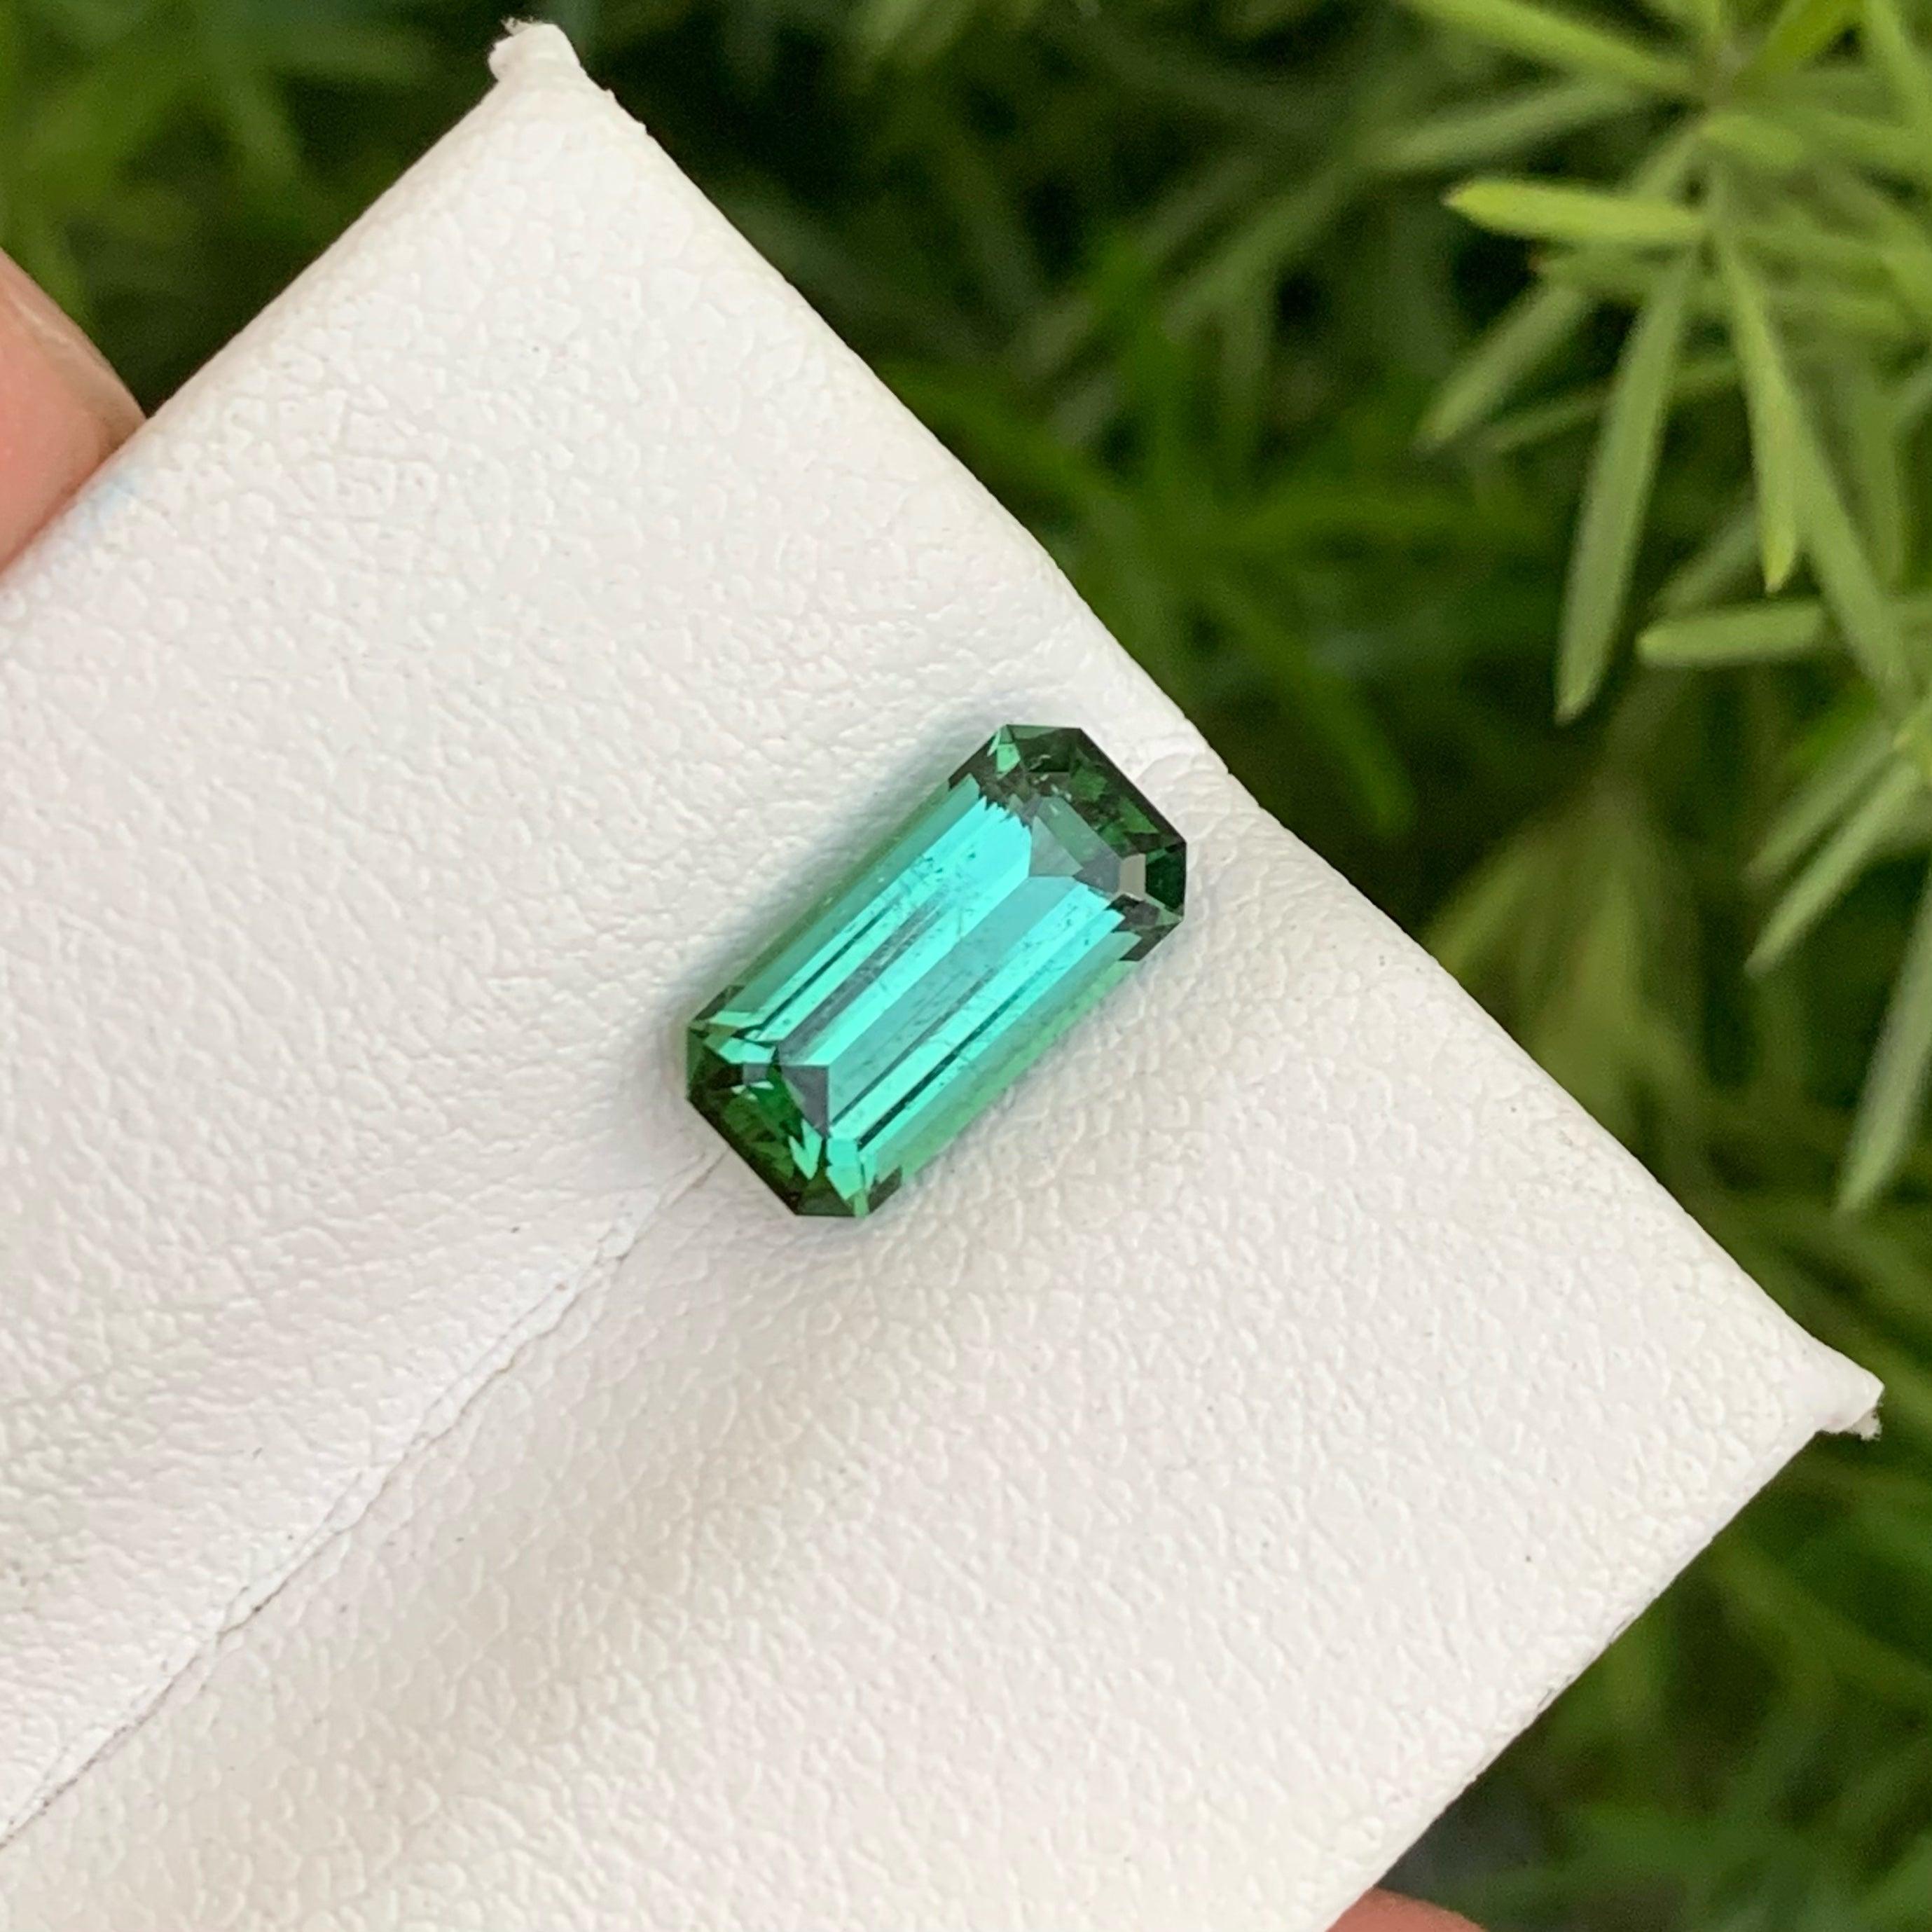 Brilliant Natural Loose Tourmaline Gemstone, available for sale at wholesale price natural high quality 1.55 Carats Loose Tourmaline From Afghanistan.

Product Information:
GEMSTONE TYPE:	Brilliant Natural Loose Tourmaline Gemstone
WEIGHT:	1.55